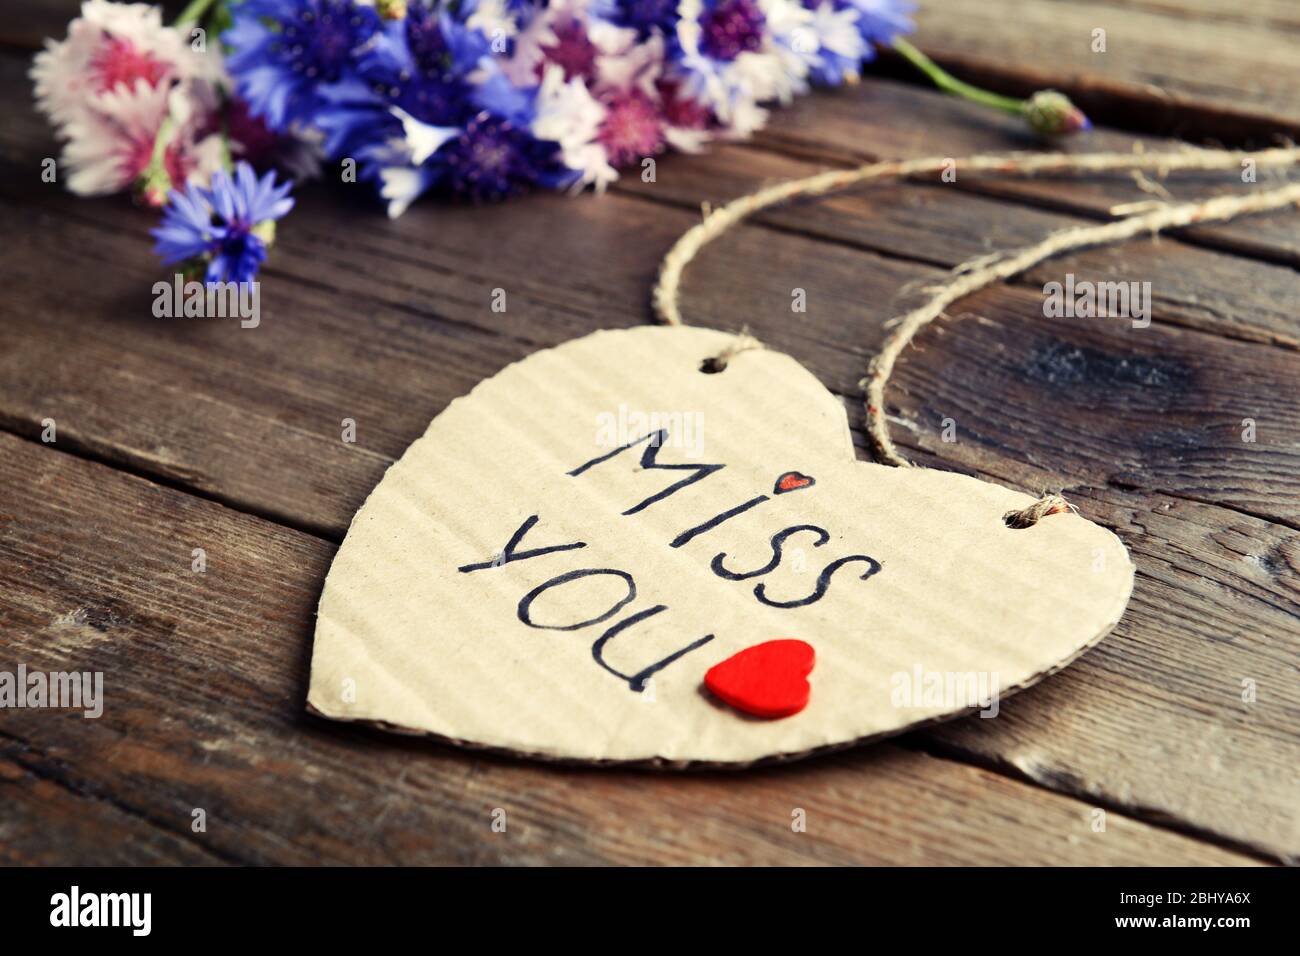 Written message with dry flowers on wooden table close up Stock Photo